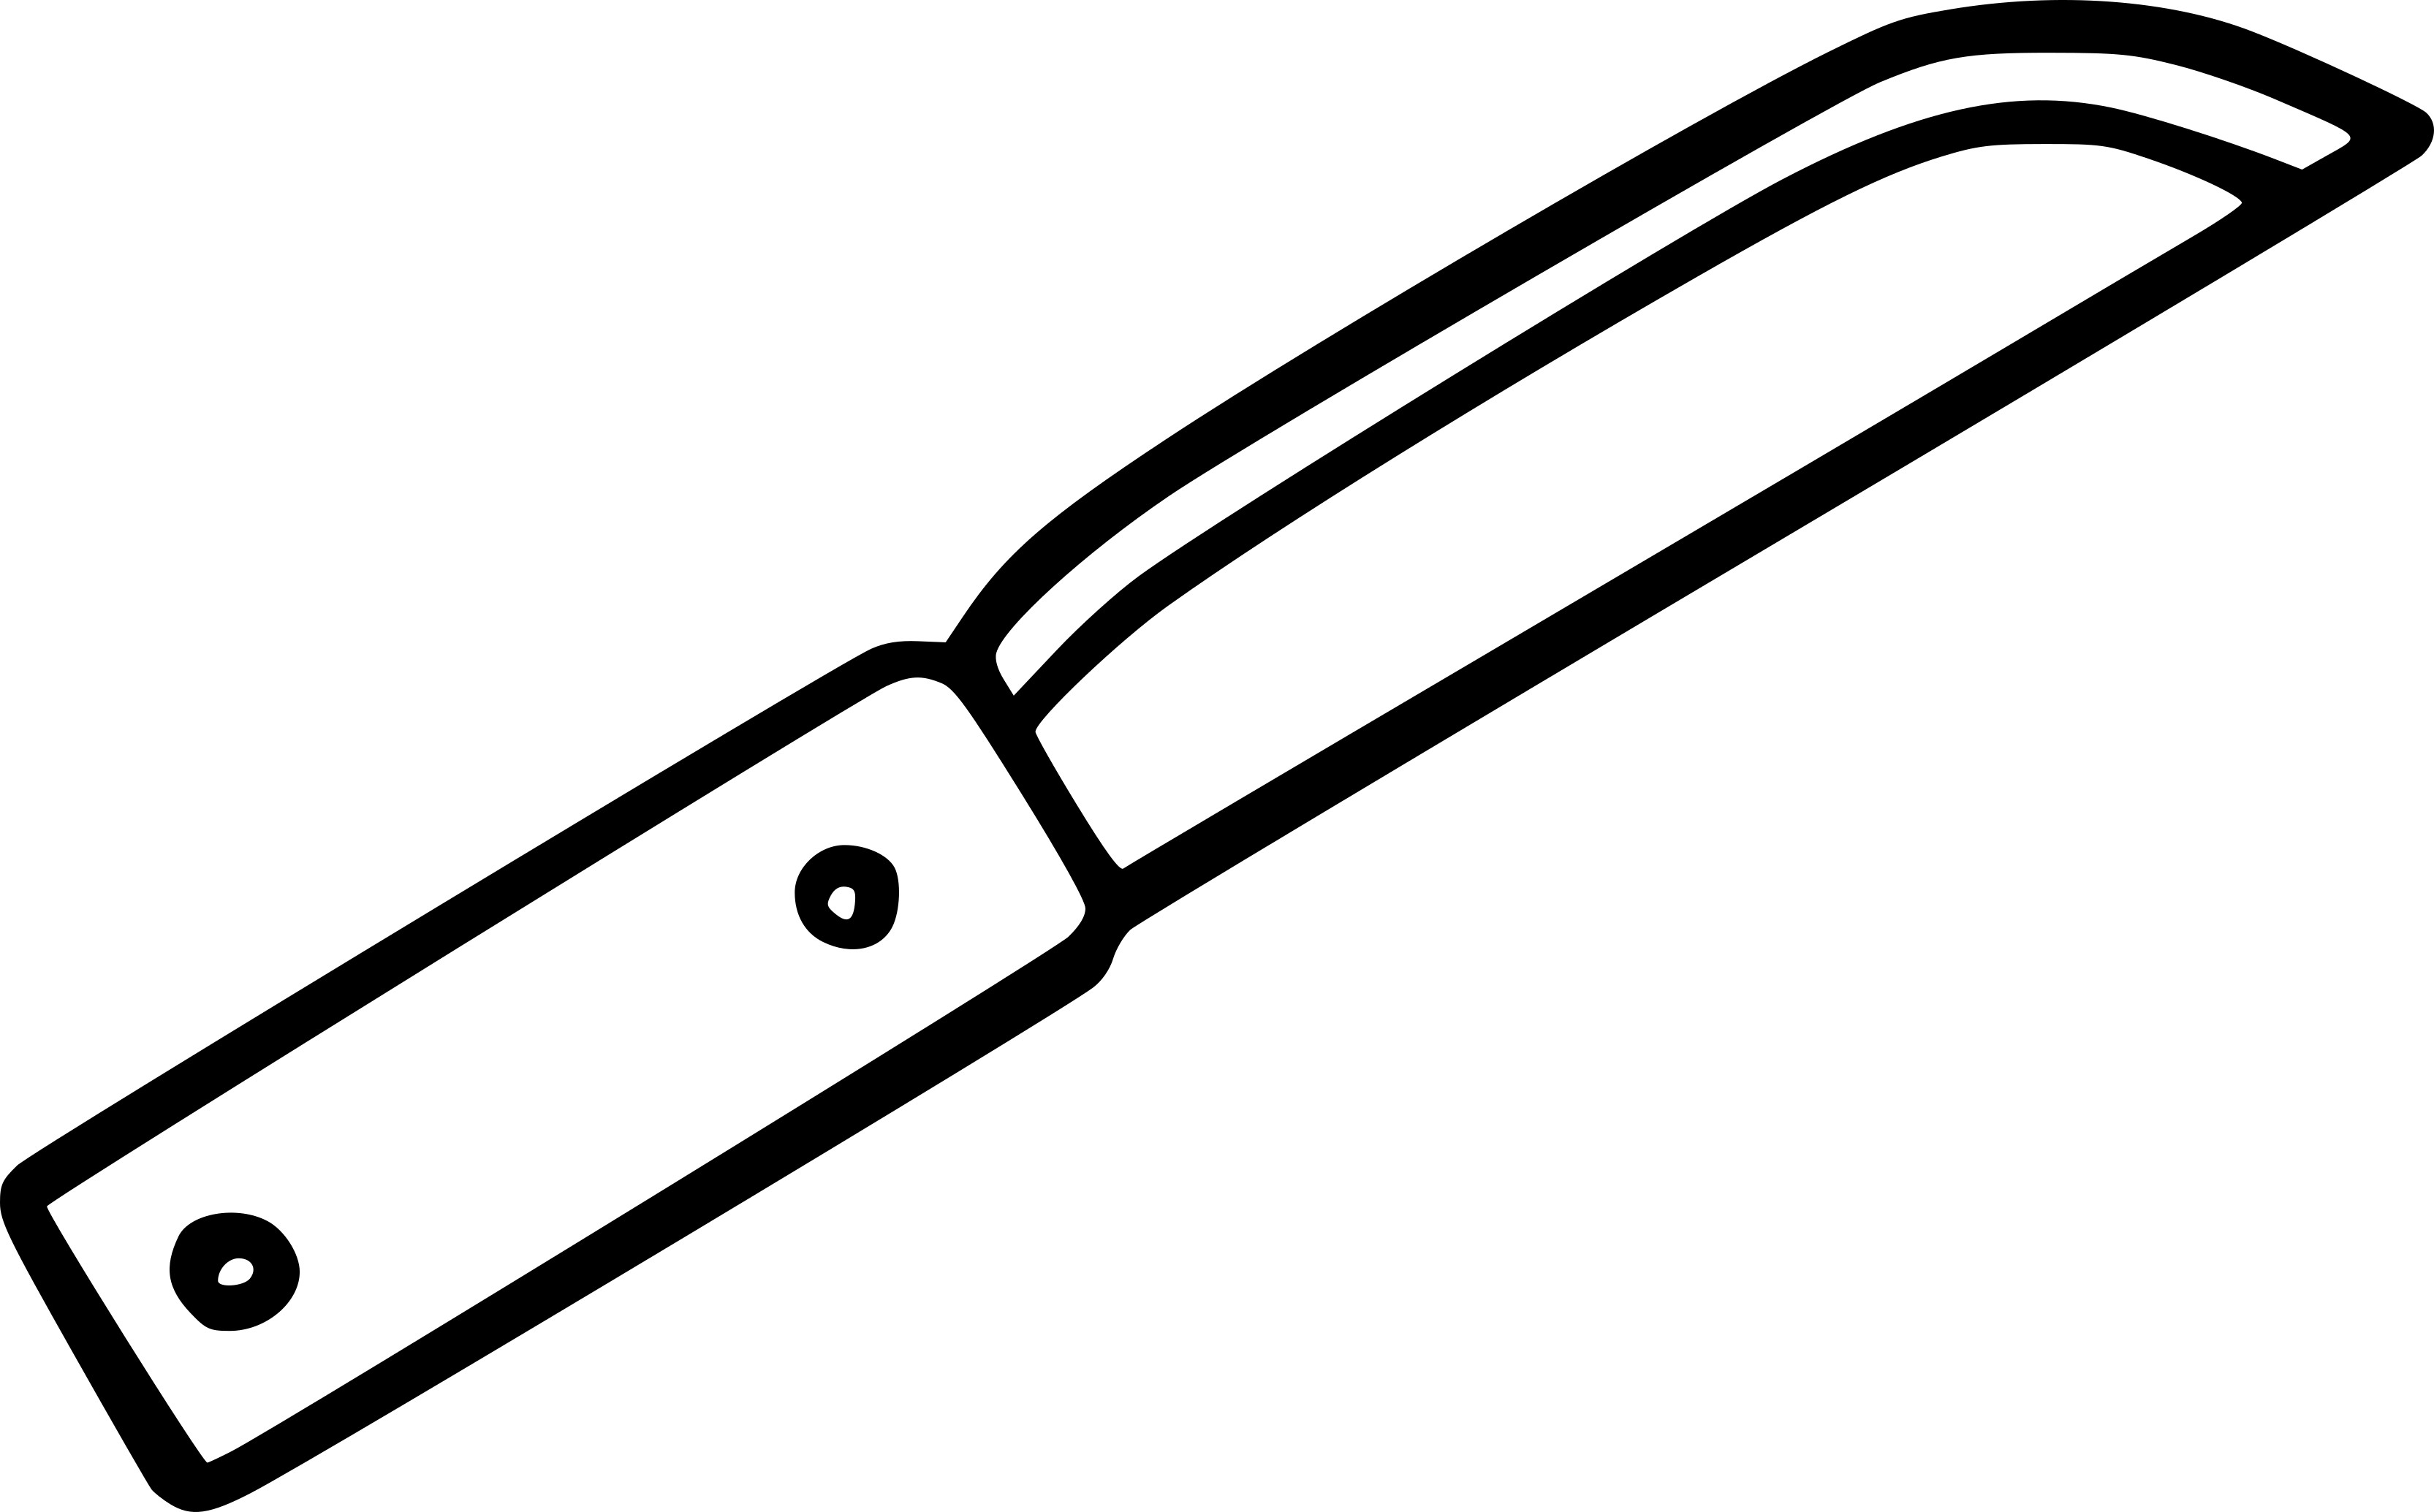 Knife coloring page